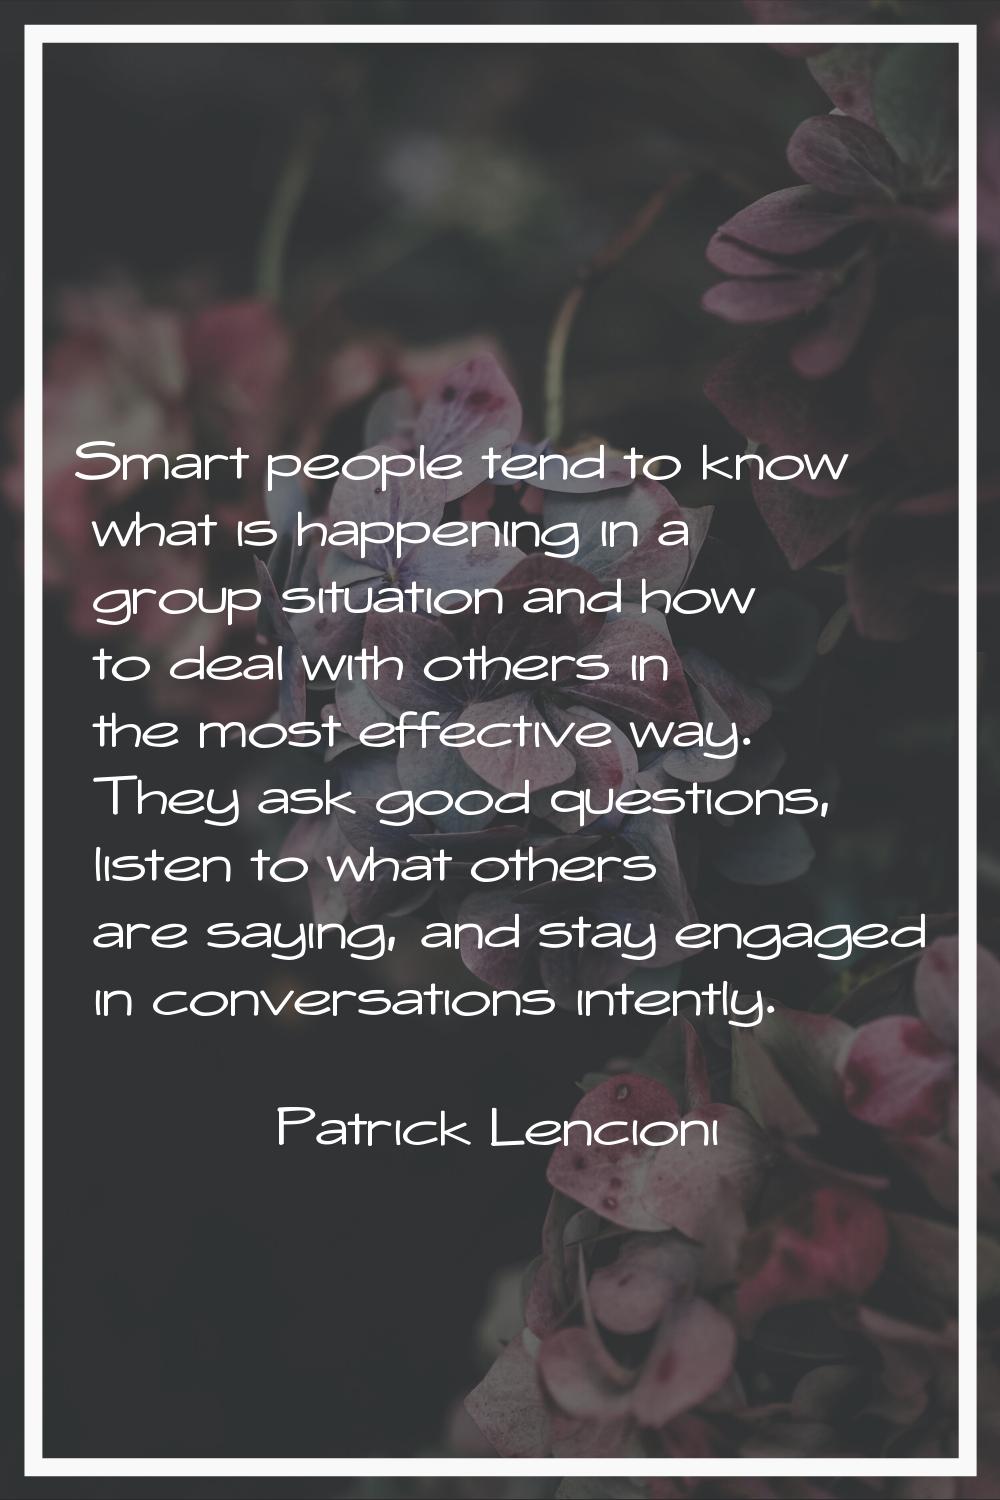 Smart people tend to know what is happening in a group situation and how to deal with others in the